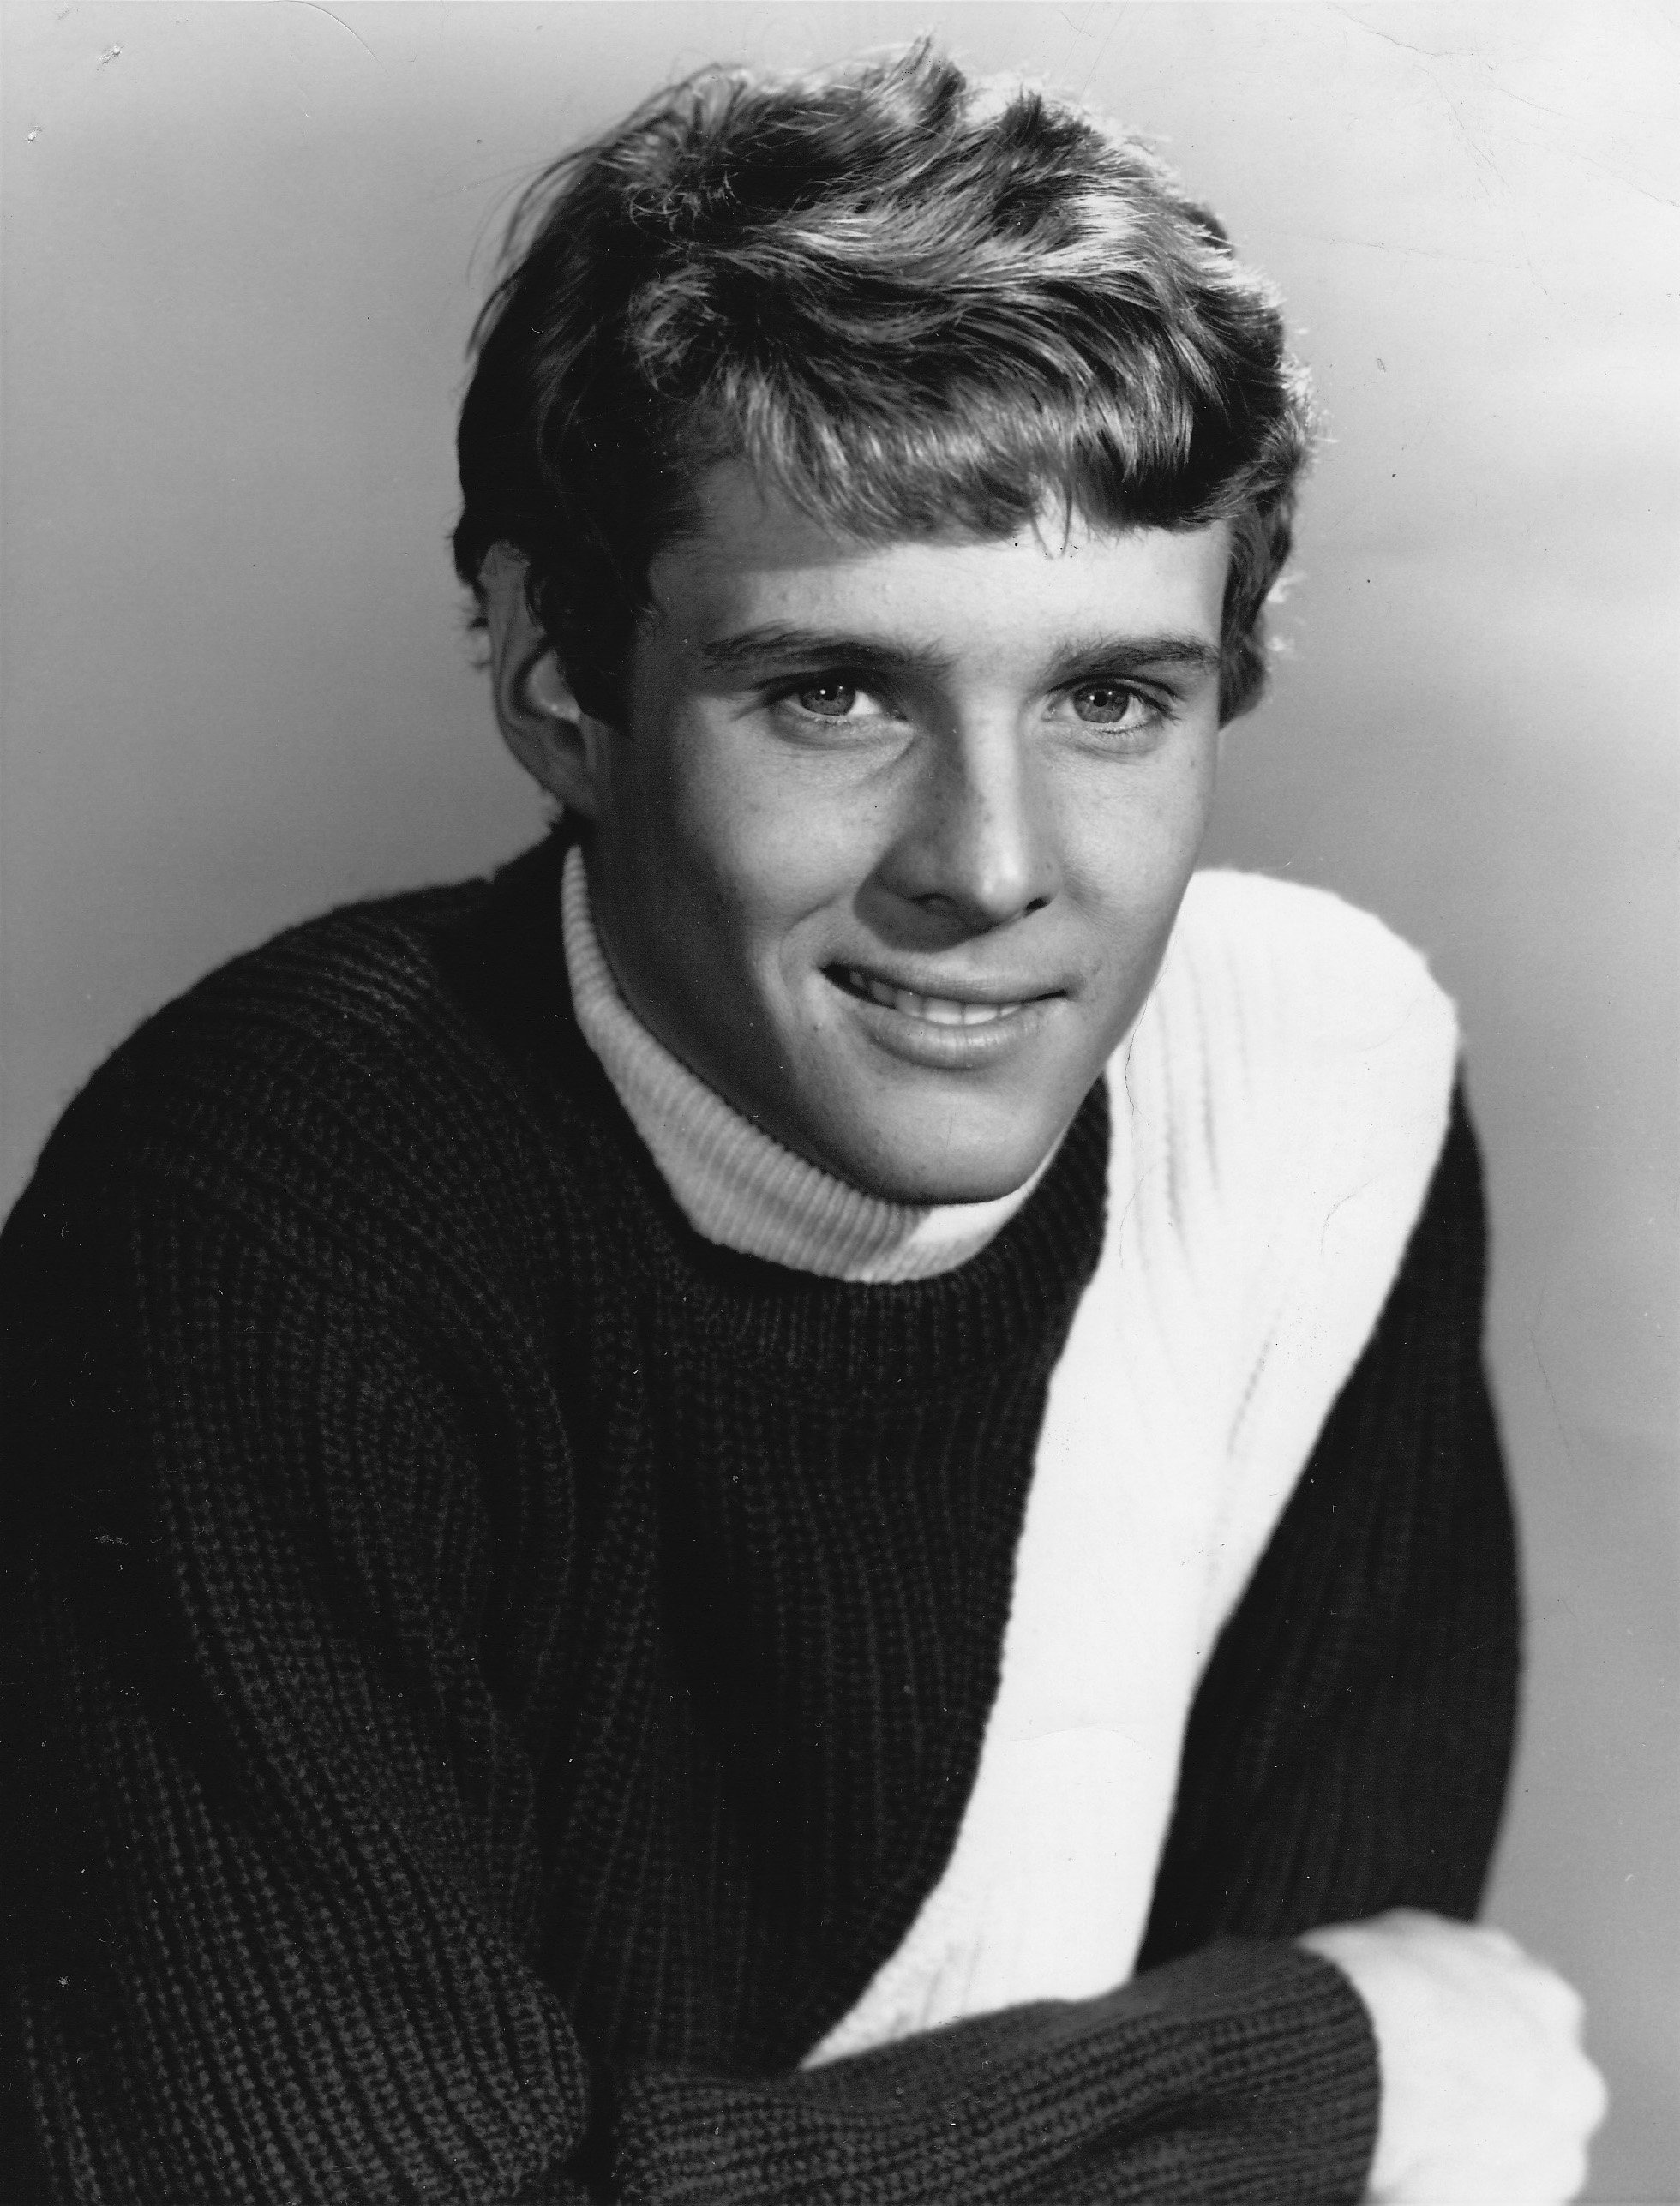 Publicity photo of Jay North promoting his starring role on the television series "Maya" | Photo: Wikimedia Commons